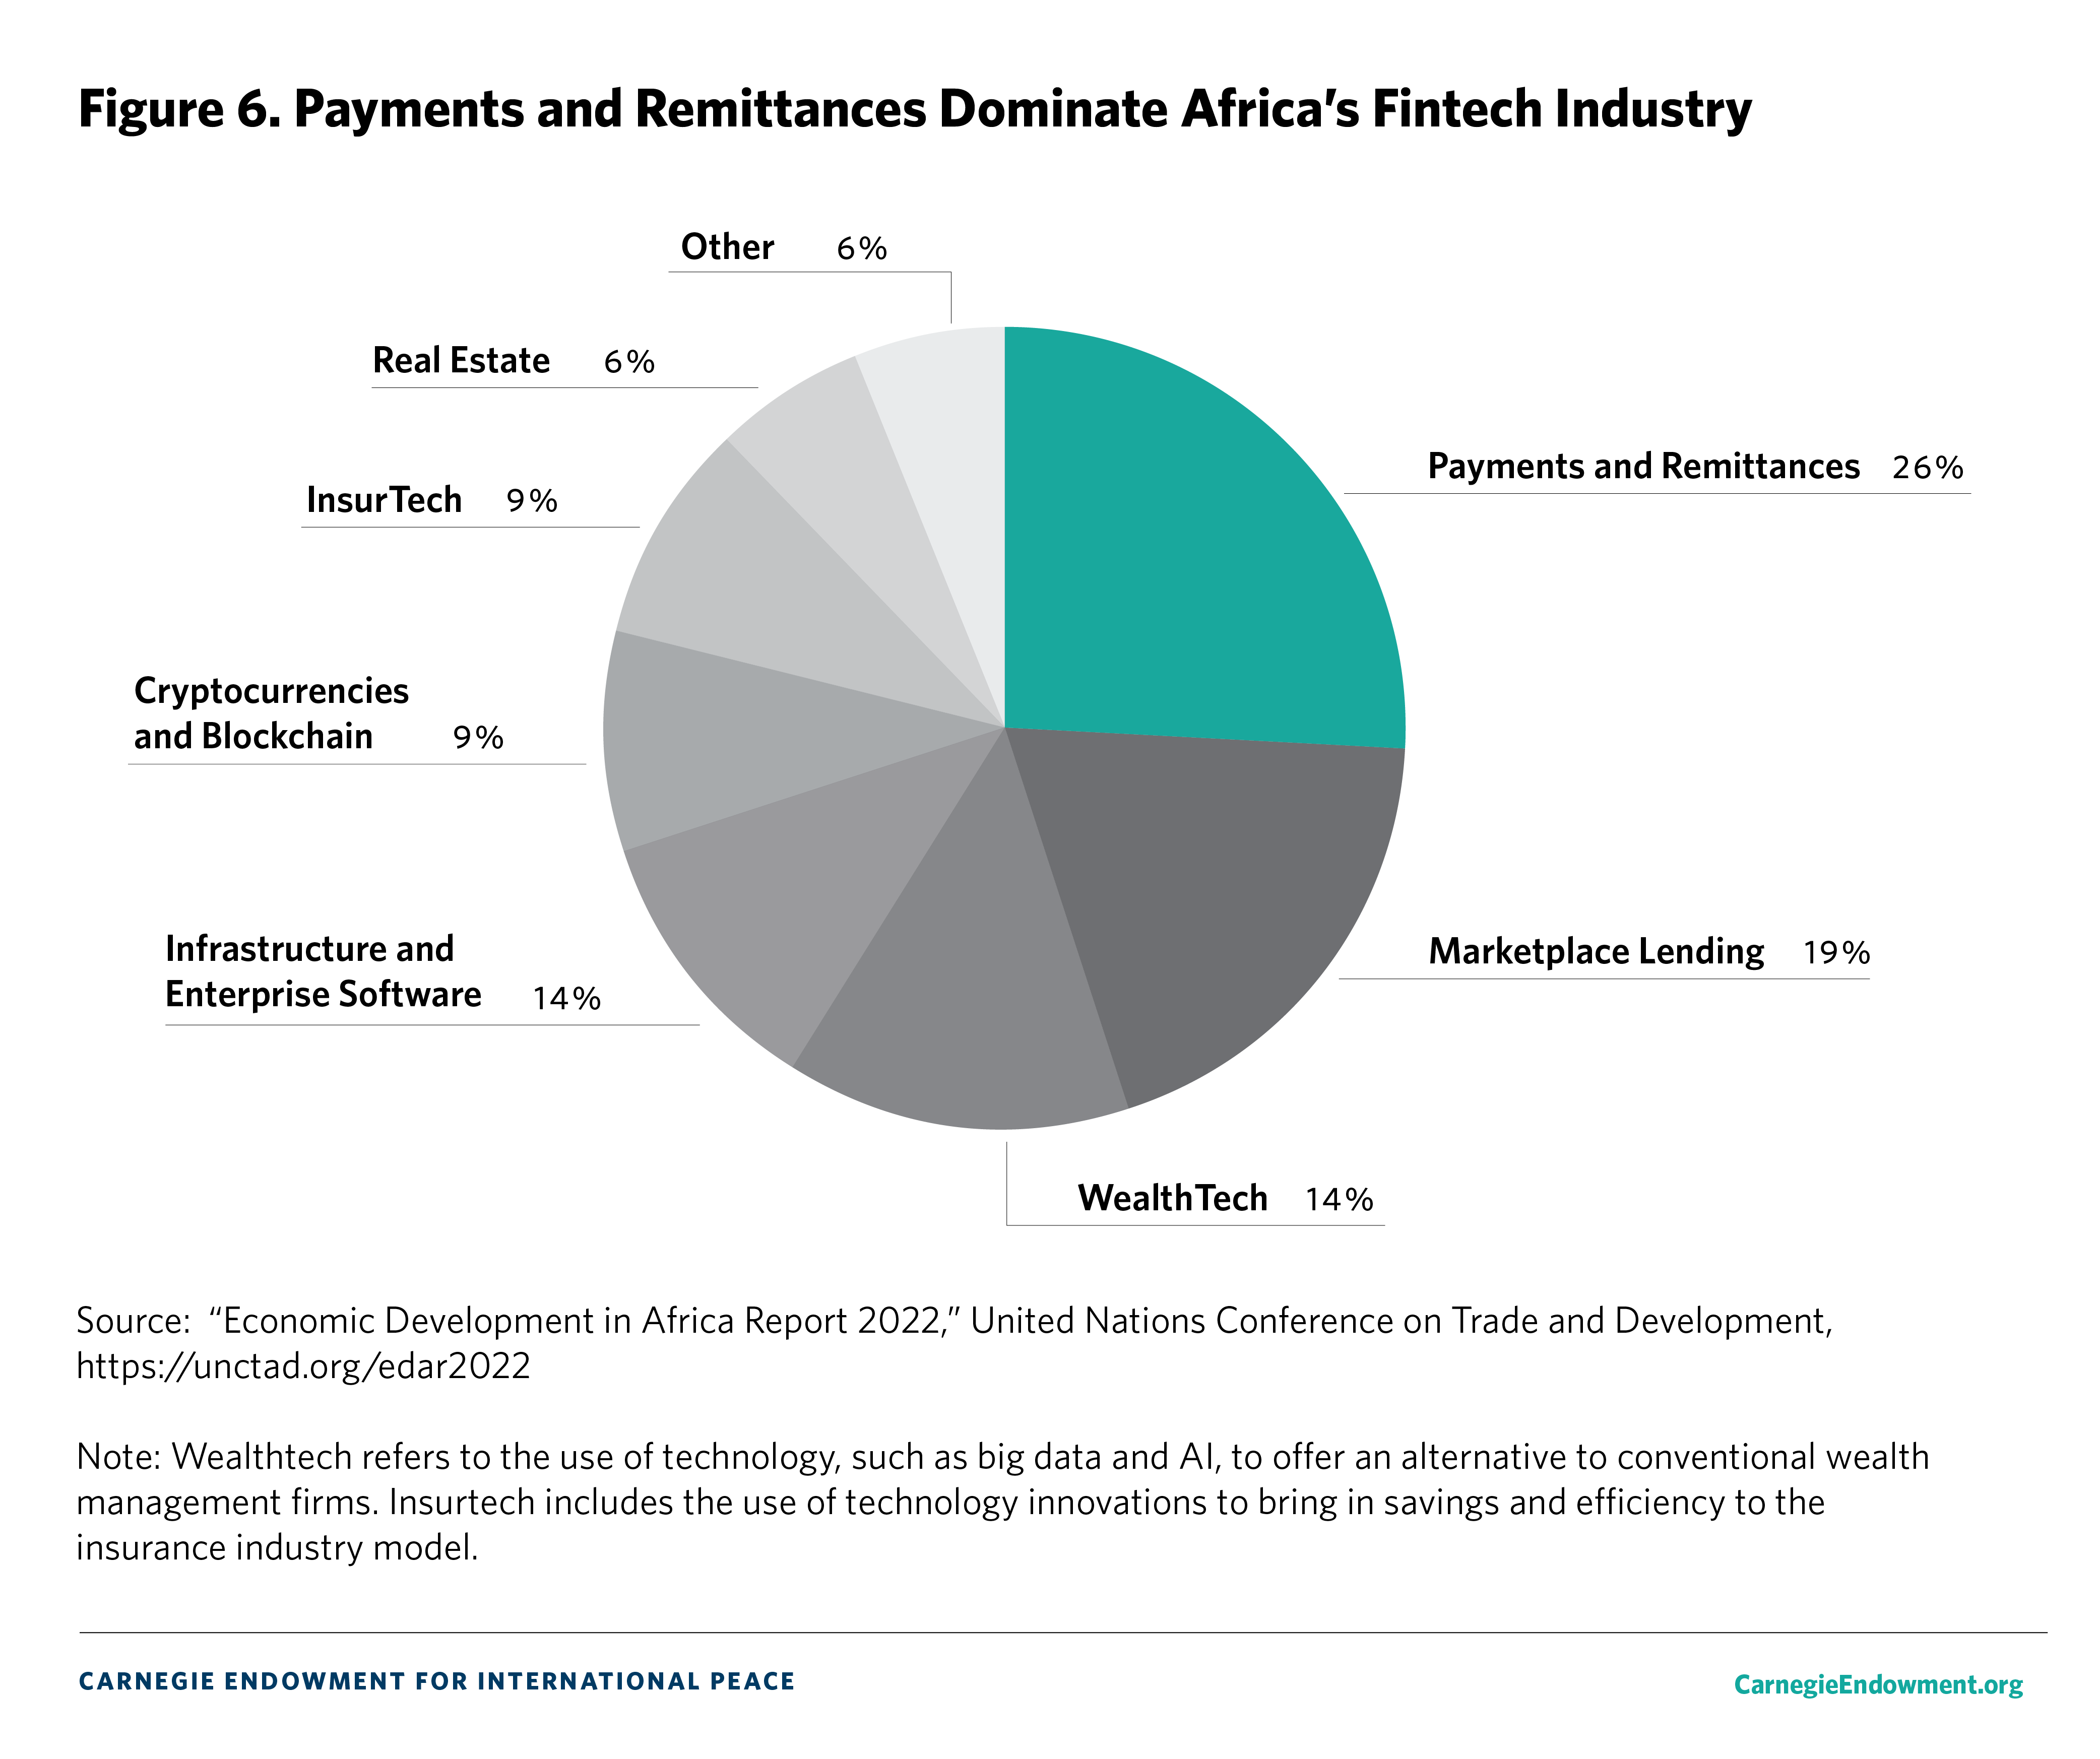 Figure 6. Payments and Remittances Dominate Africa’s Fintech